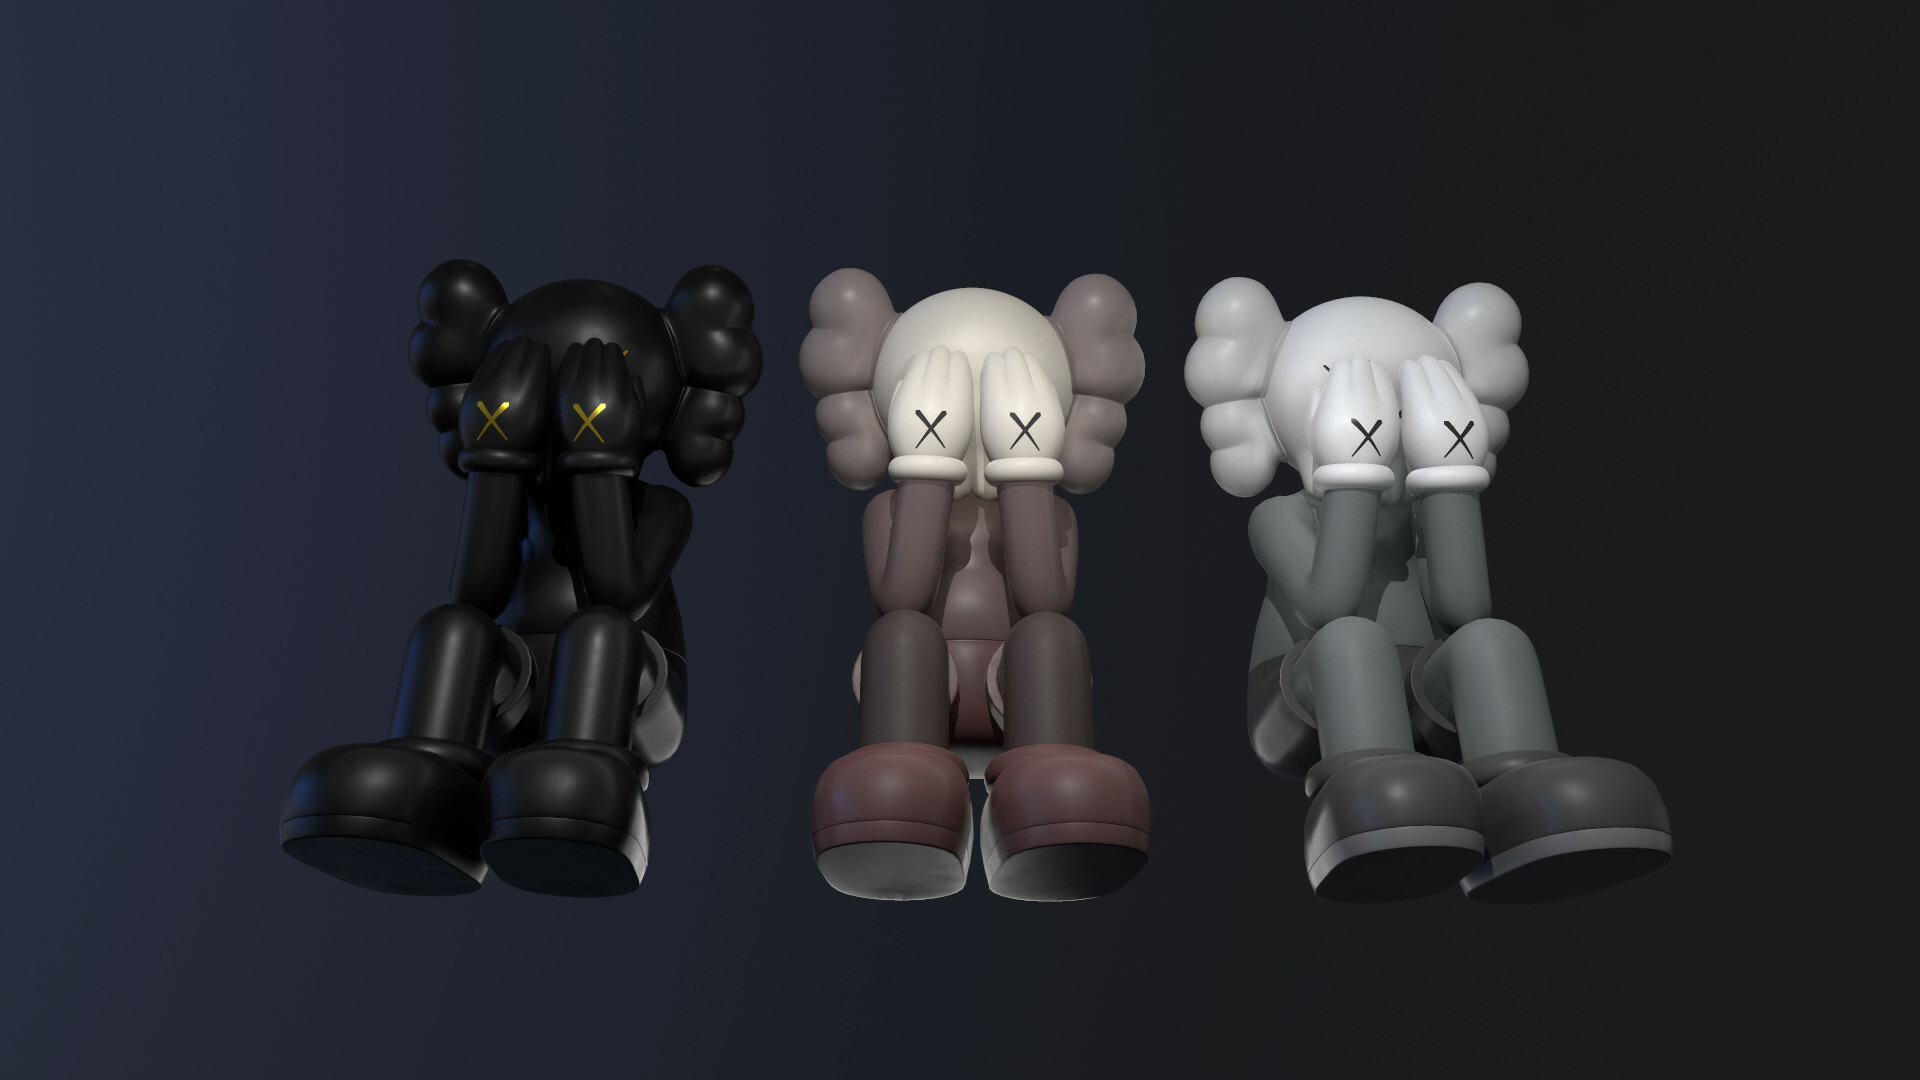 KAWS: Collaborated with Undefeated Brand on a billboard project in Los Angeles, in 2004. 1920x1080 Full HD Wallpaper.